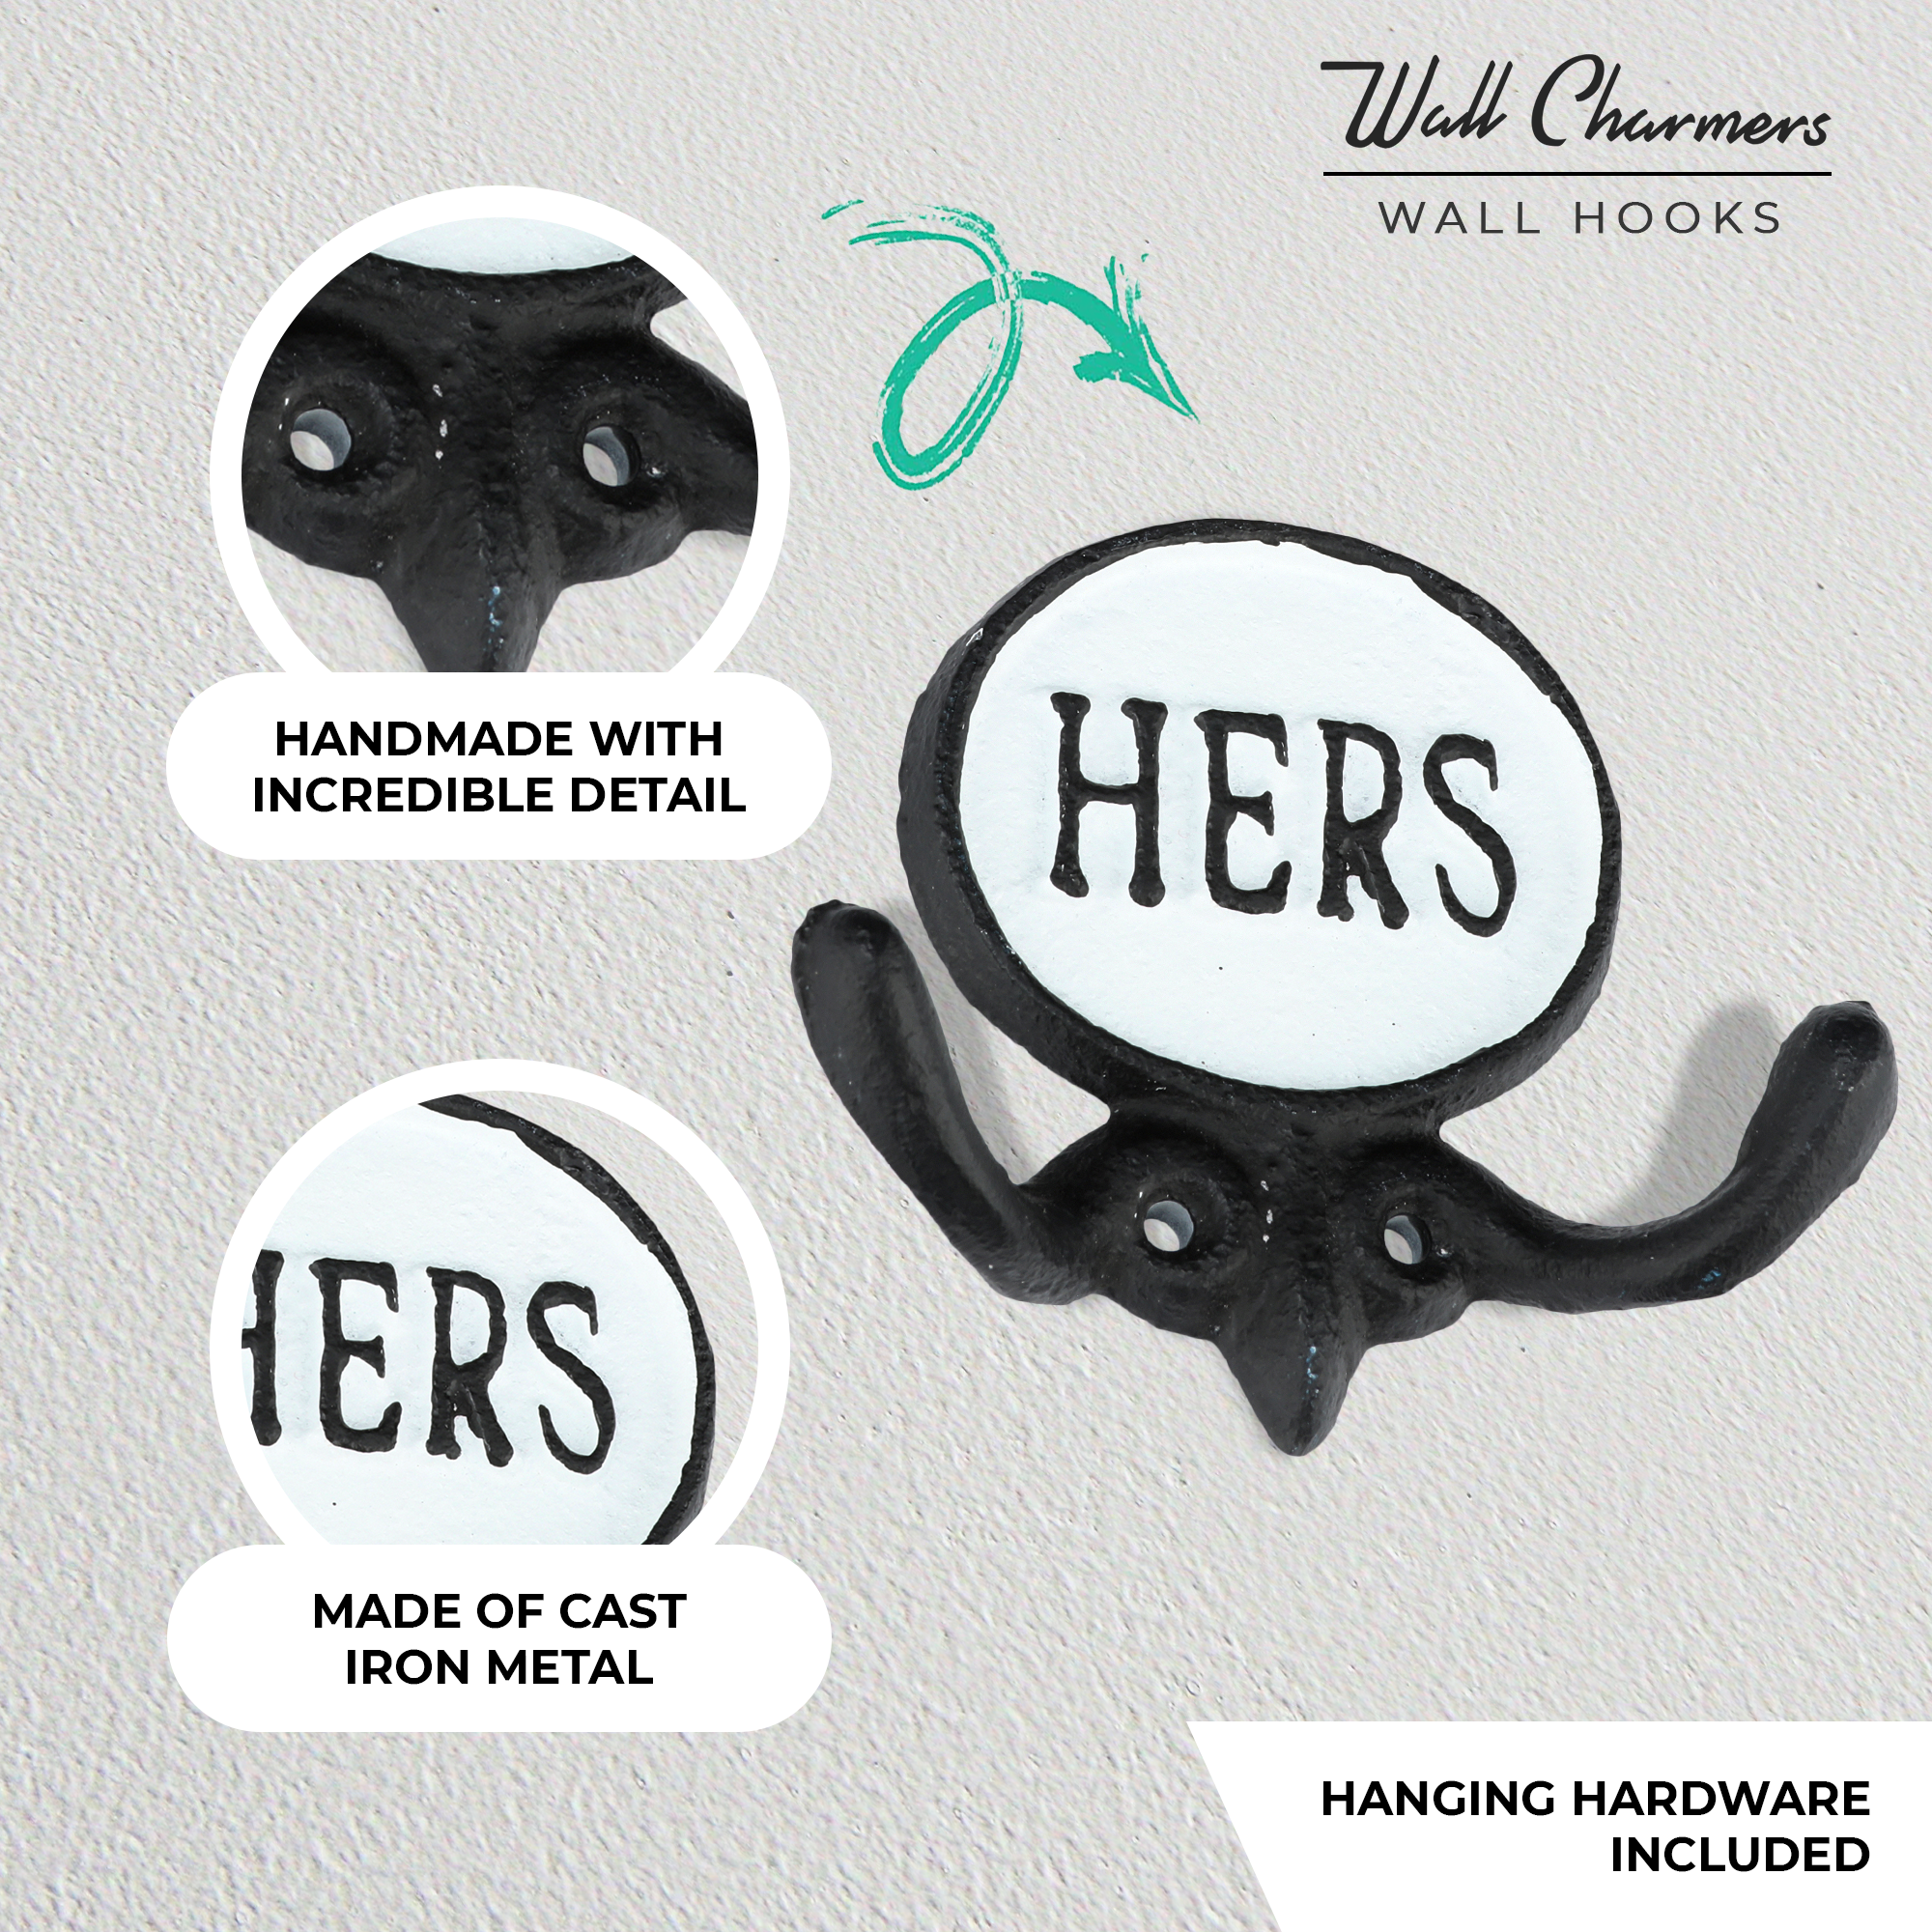 Set of 2 Black & White His and Hers Towel Hooks, 5.8 – Wall Charmers